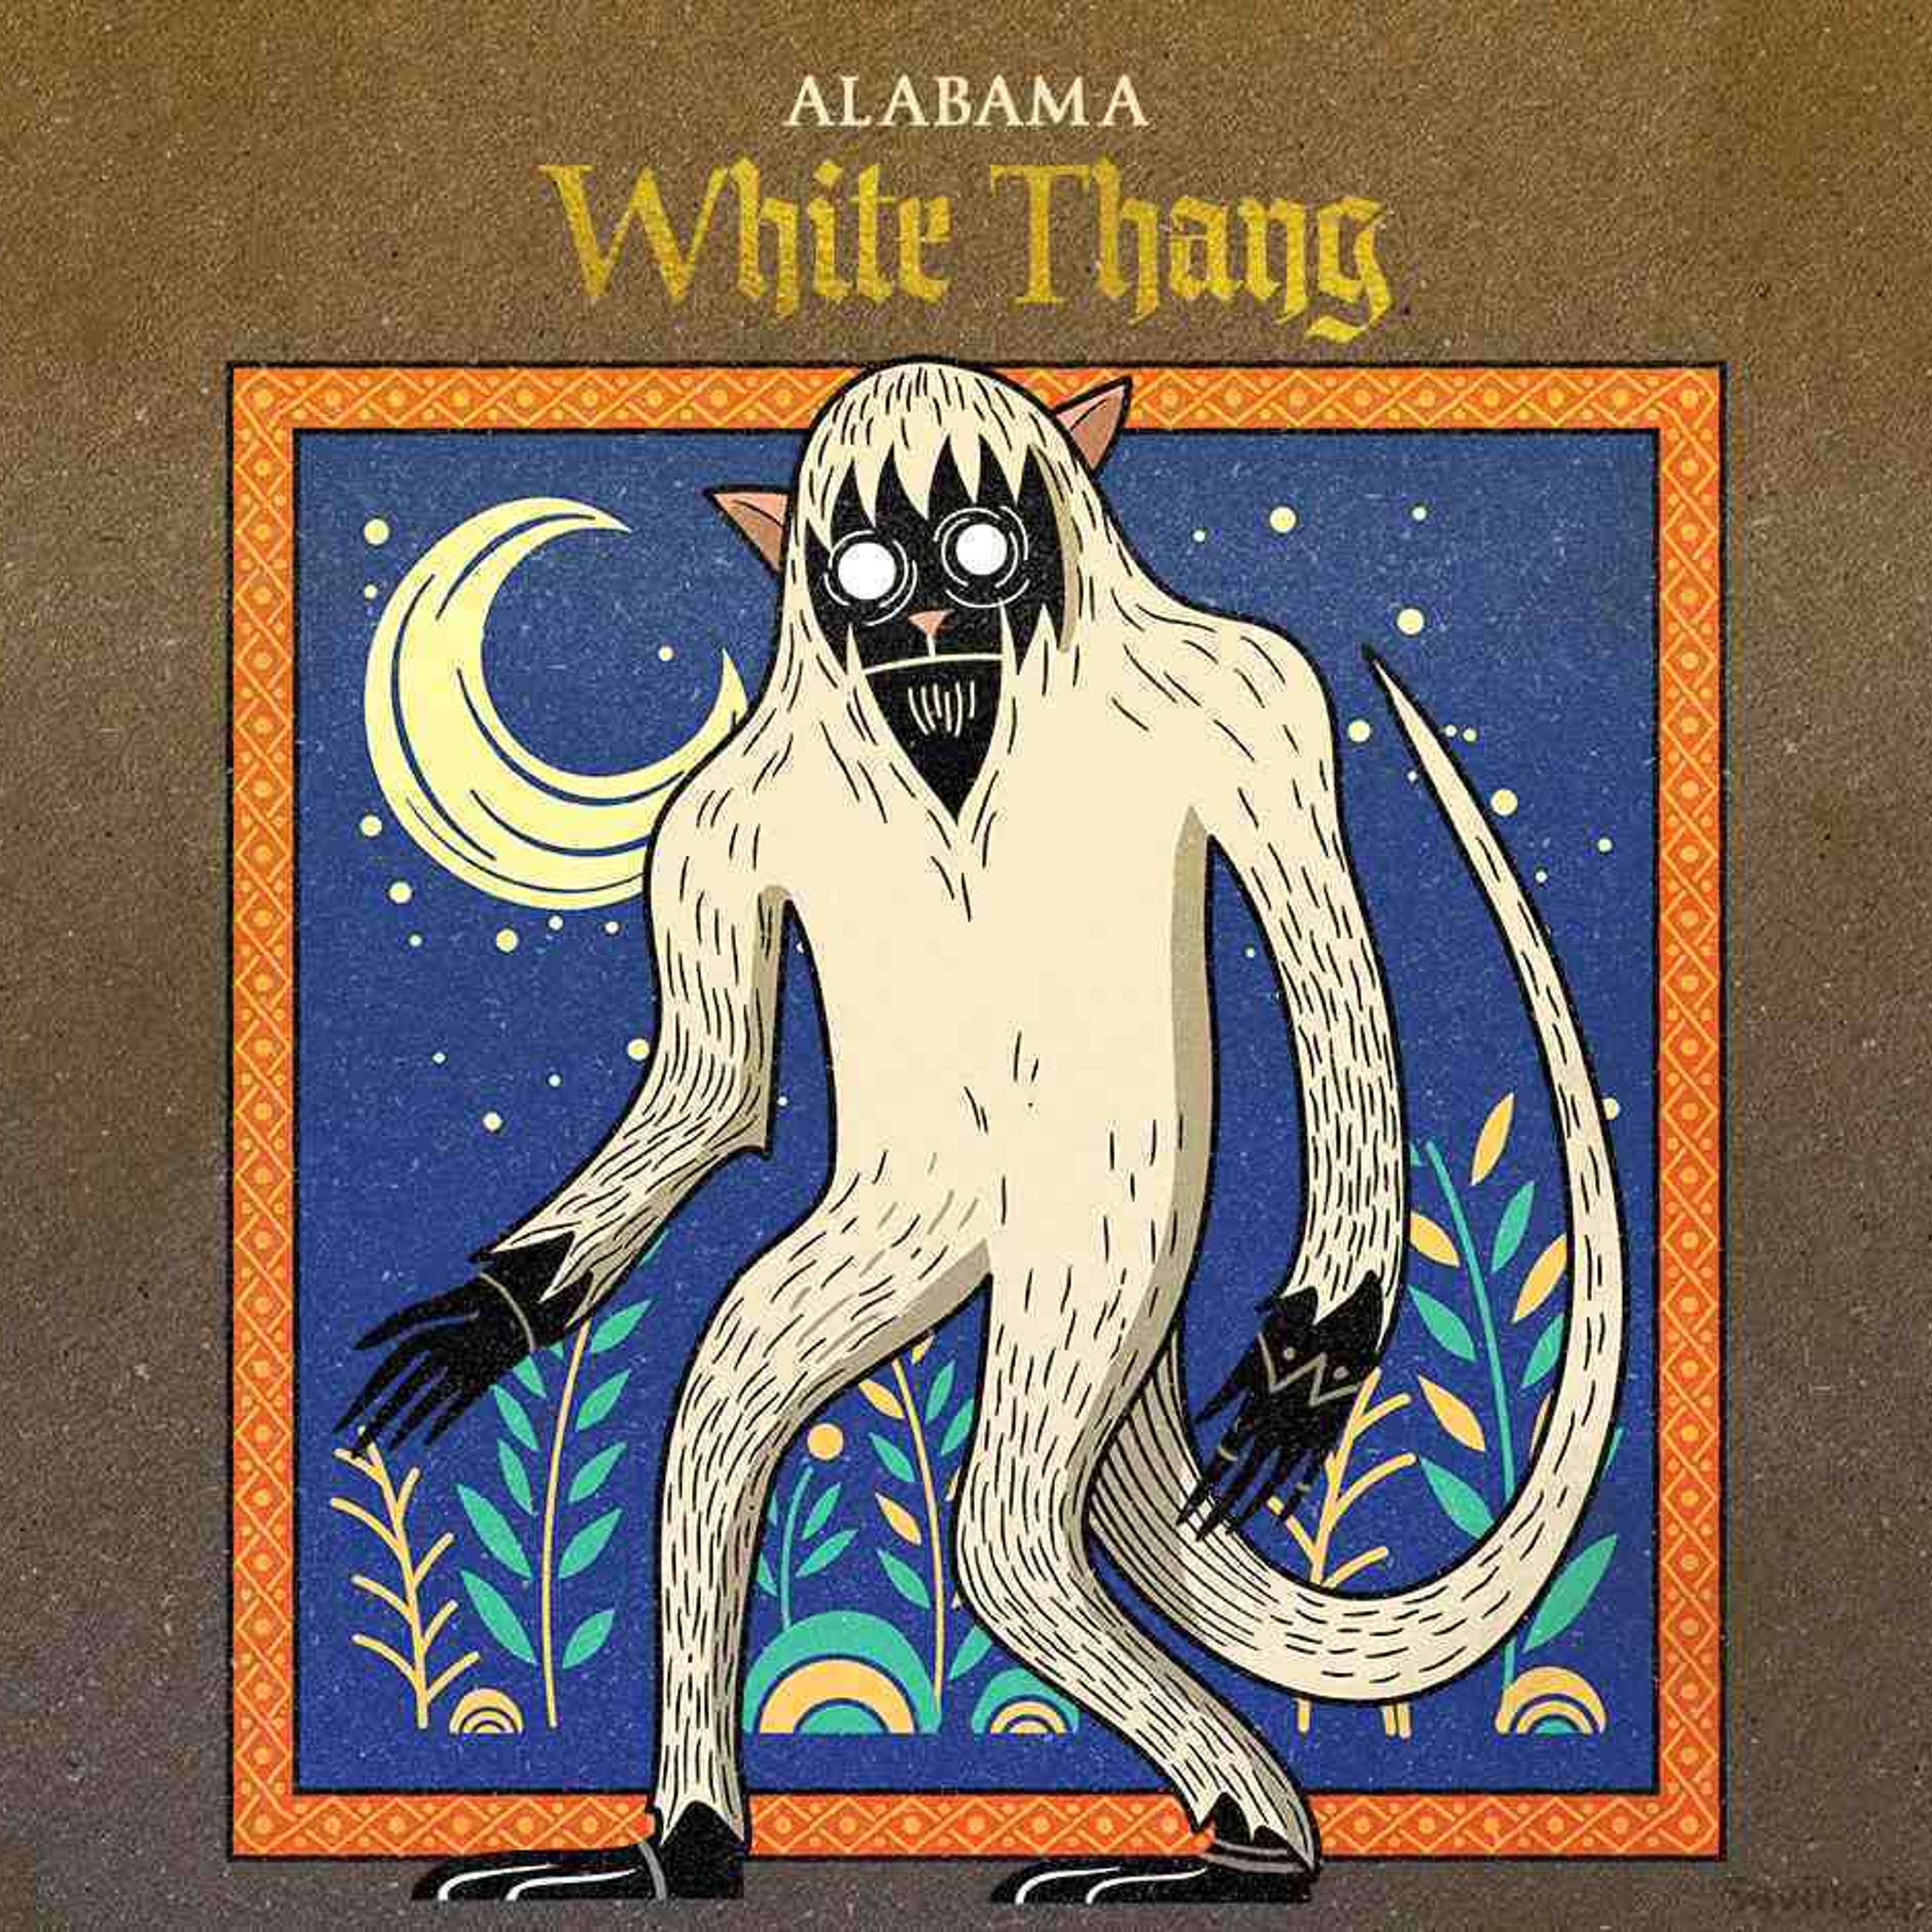 Trailer 1: The Alabama White Thing. ***COMING SOON*** All Things Paranormal and Cryptids: Part 1 --- with special guest author/researcher Connor Flynn from Bigfoot Anonymous ***COMING SOON***